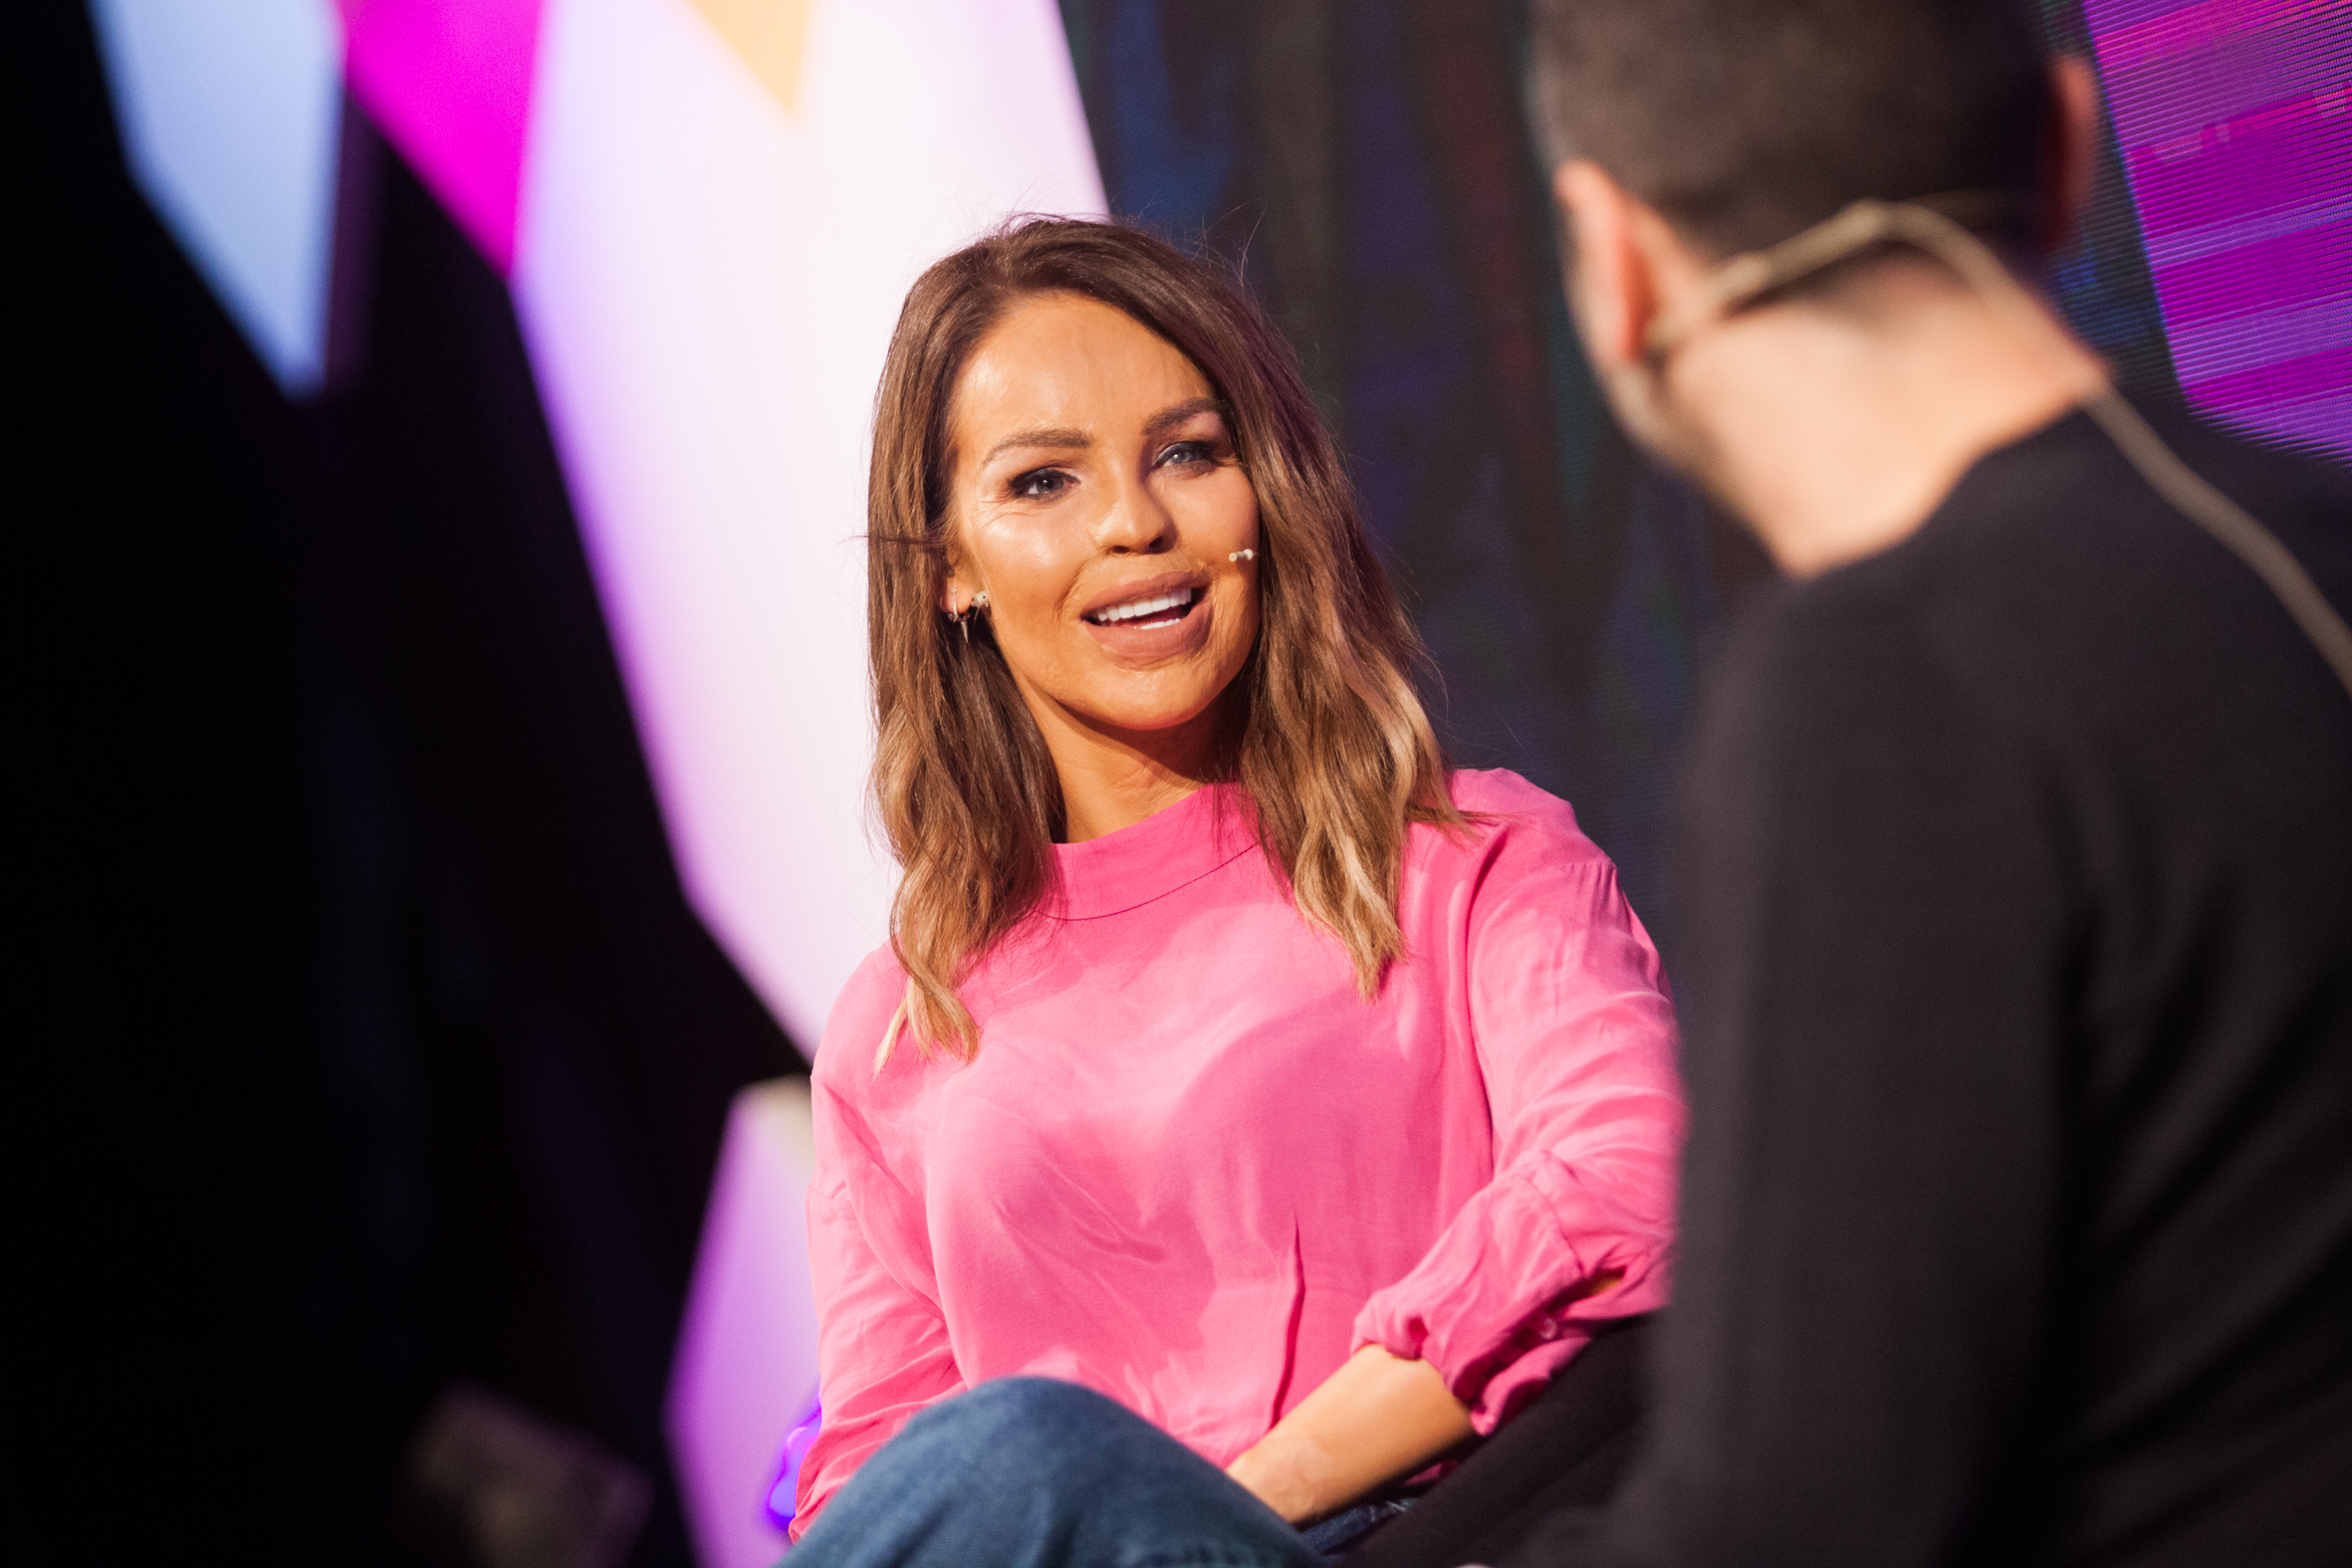 Katie Piper &amp; panel at MAD//Fest conference